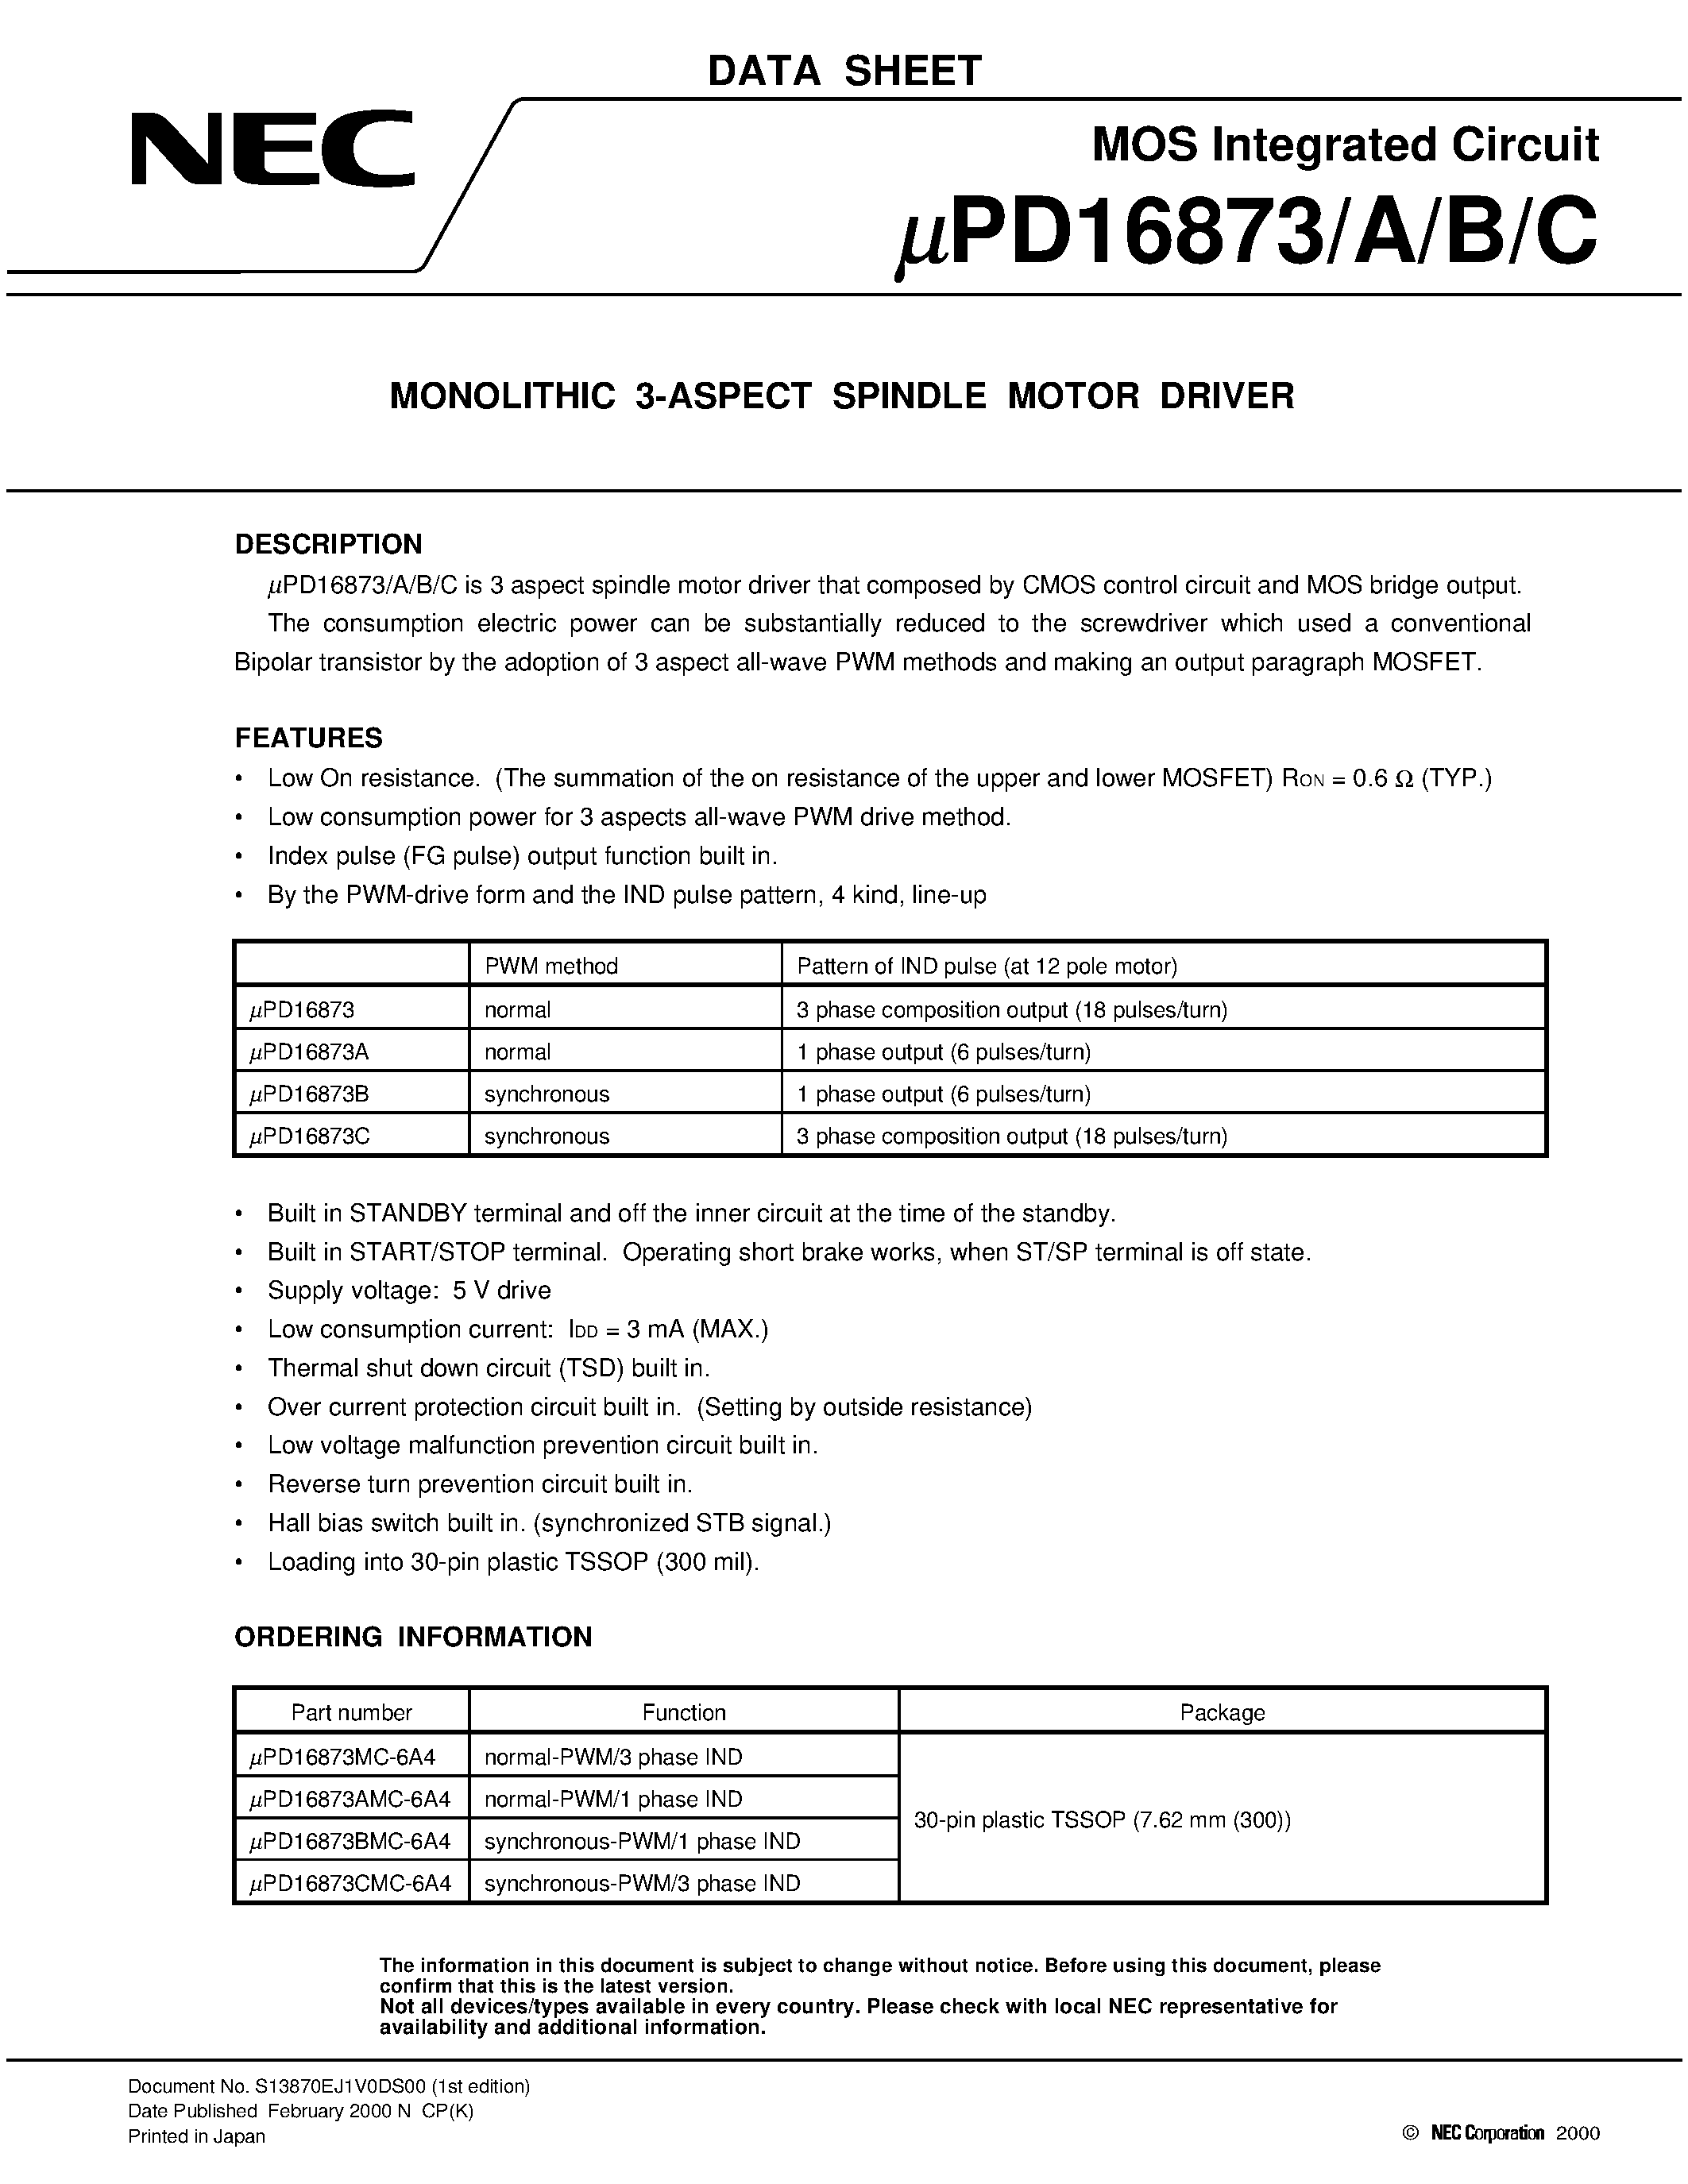 Datasheet UPD16873C - MONOLITHIC 3-ASPECT SPINDLE MOTOR DRIVER page 1